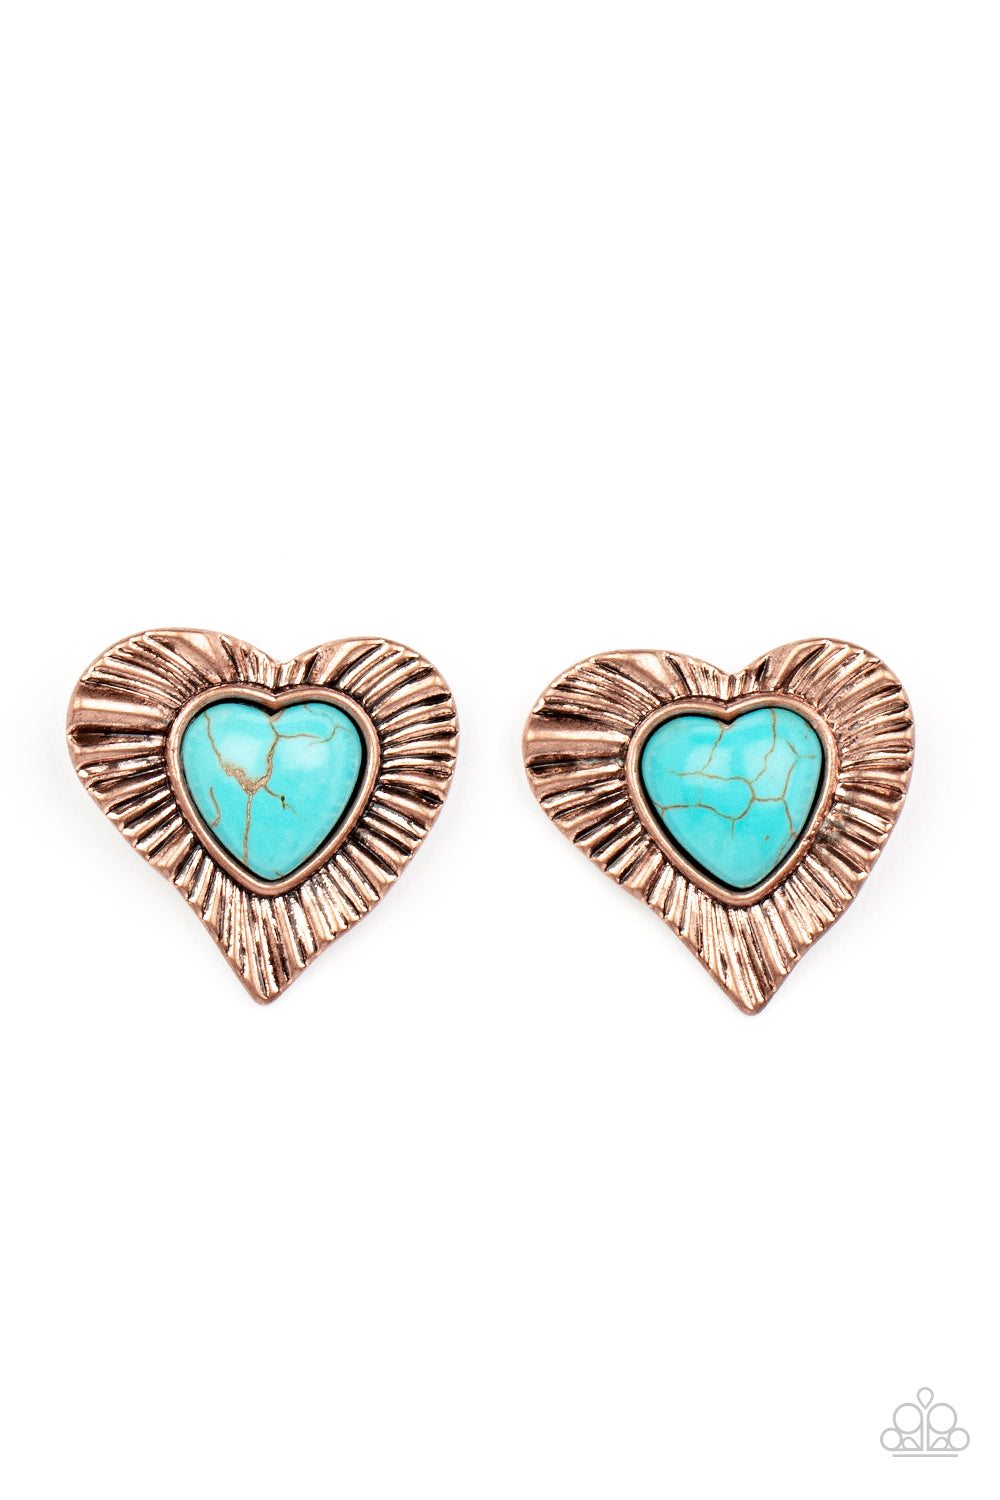 Rustic Romance - Copper & Turquoise Stone Earrings - Paparazzi Accessories 